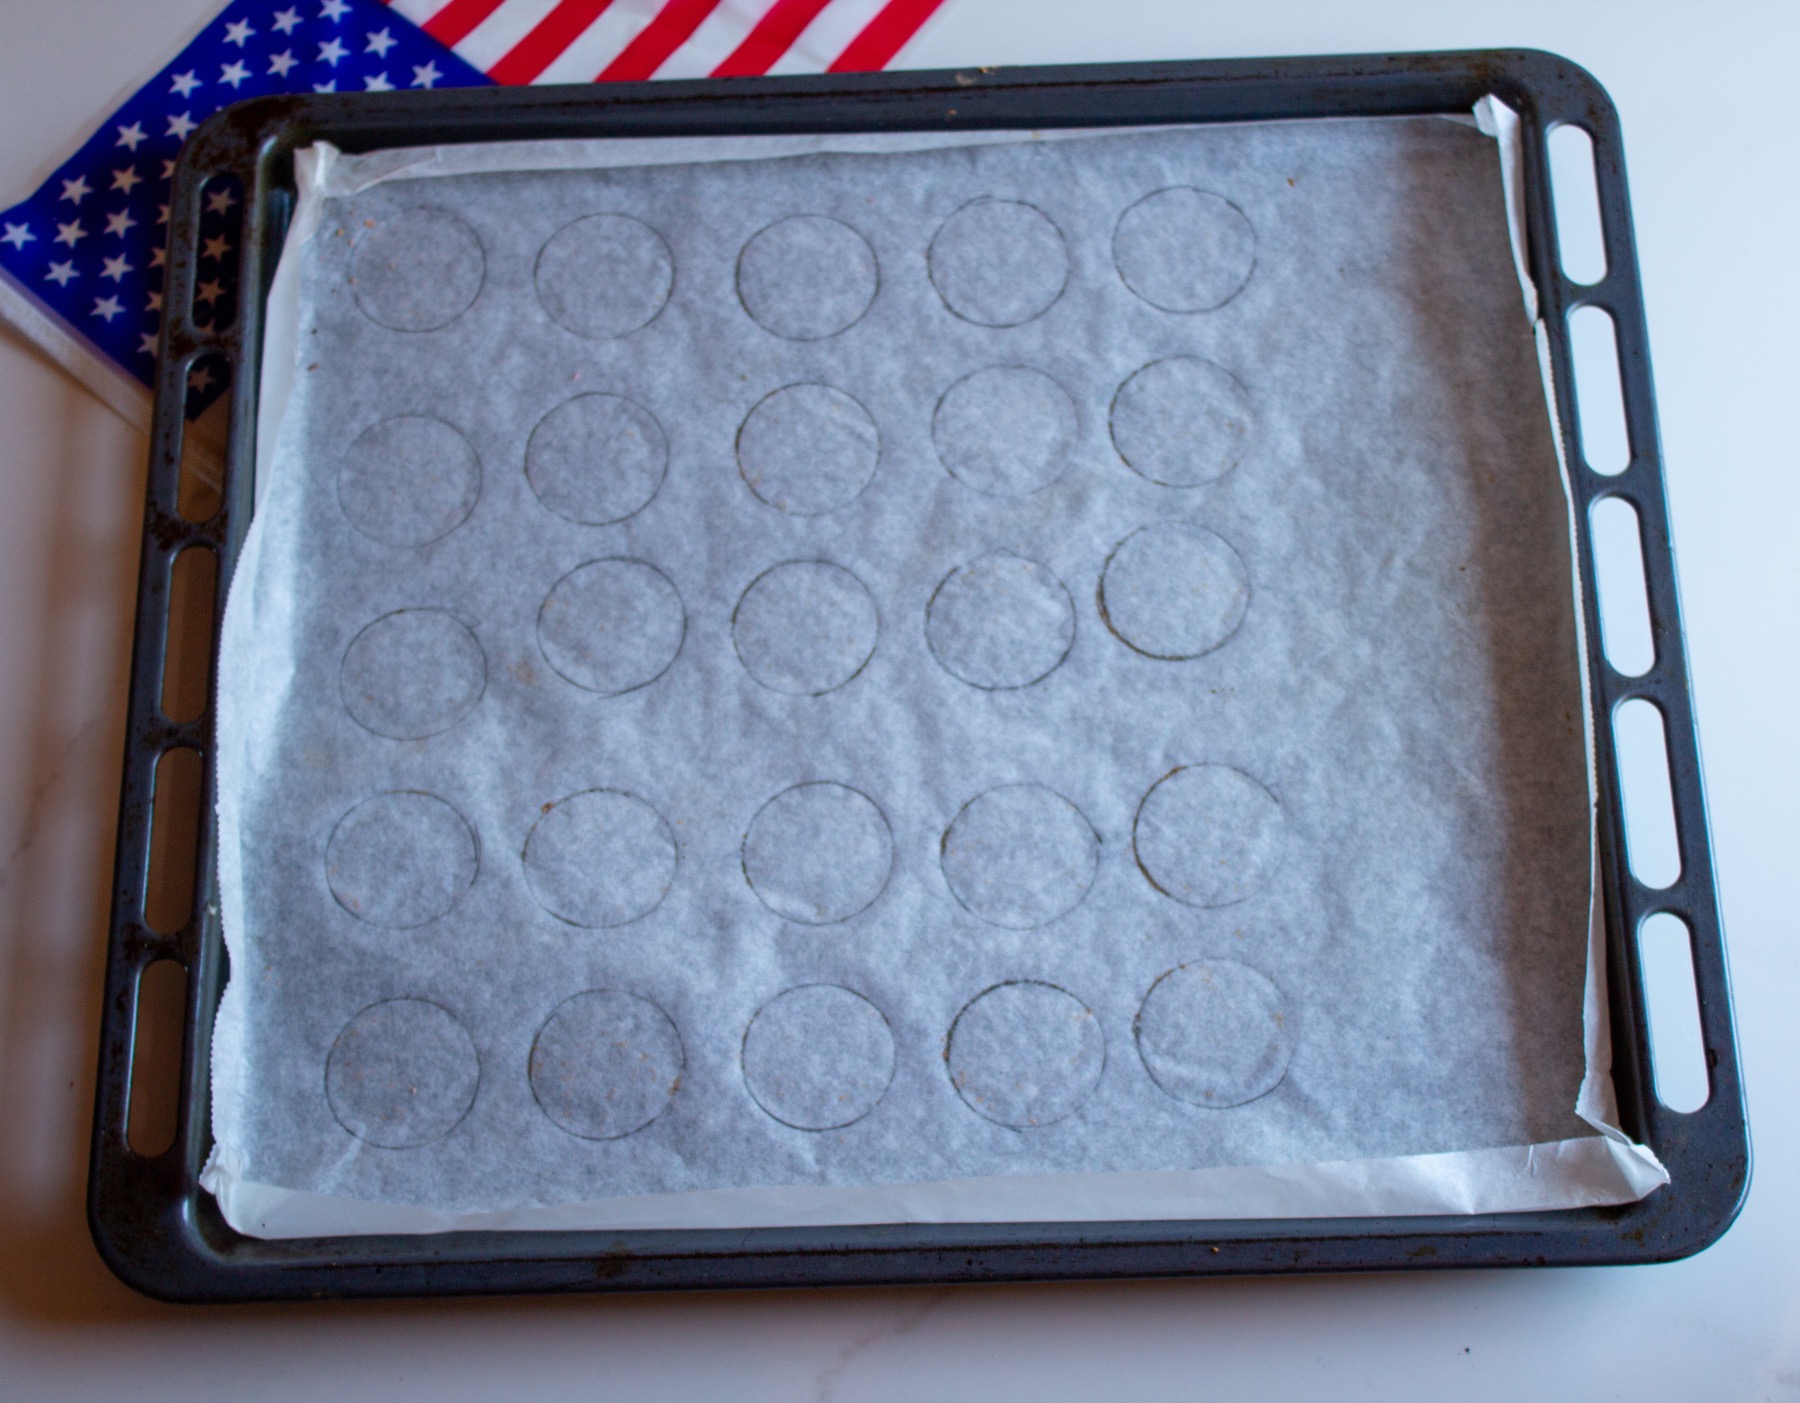 mark the cookie sheet for size and placement of macarons